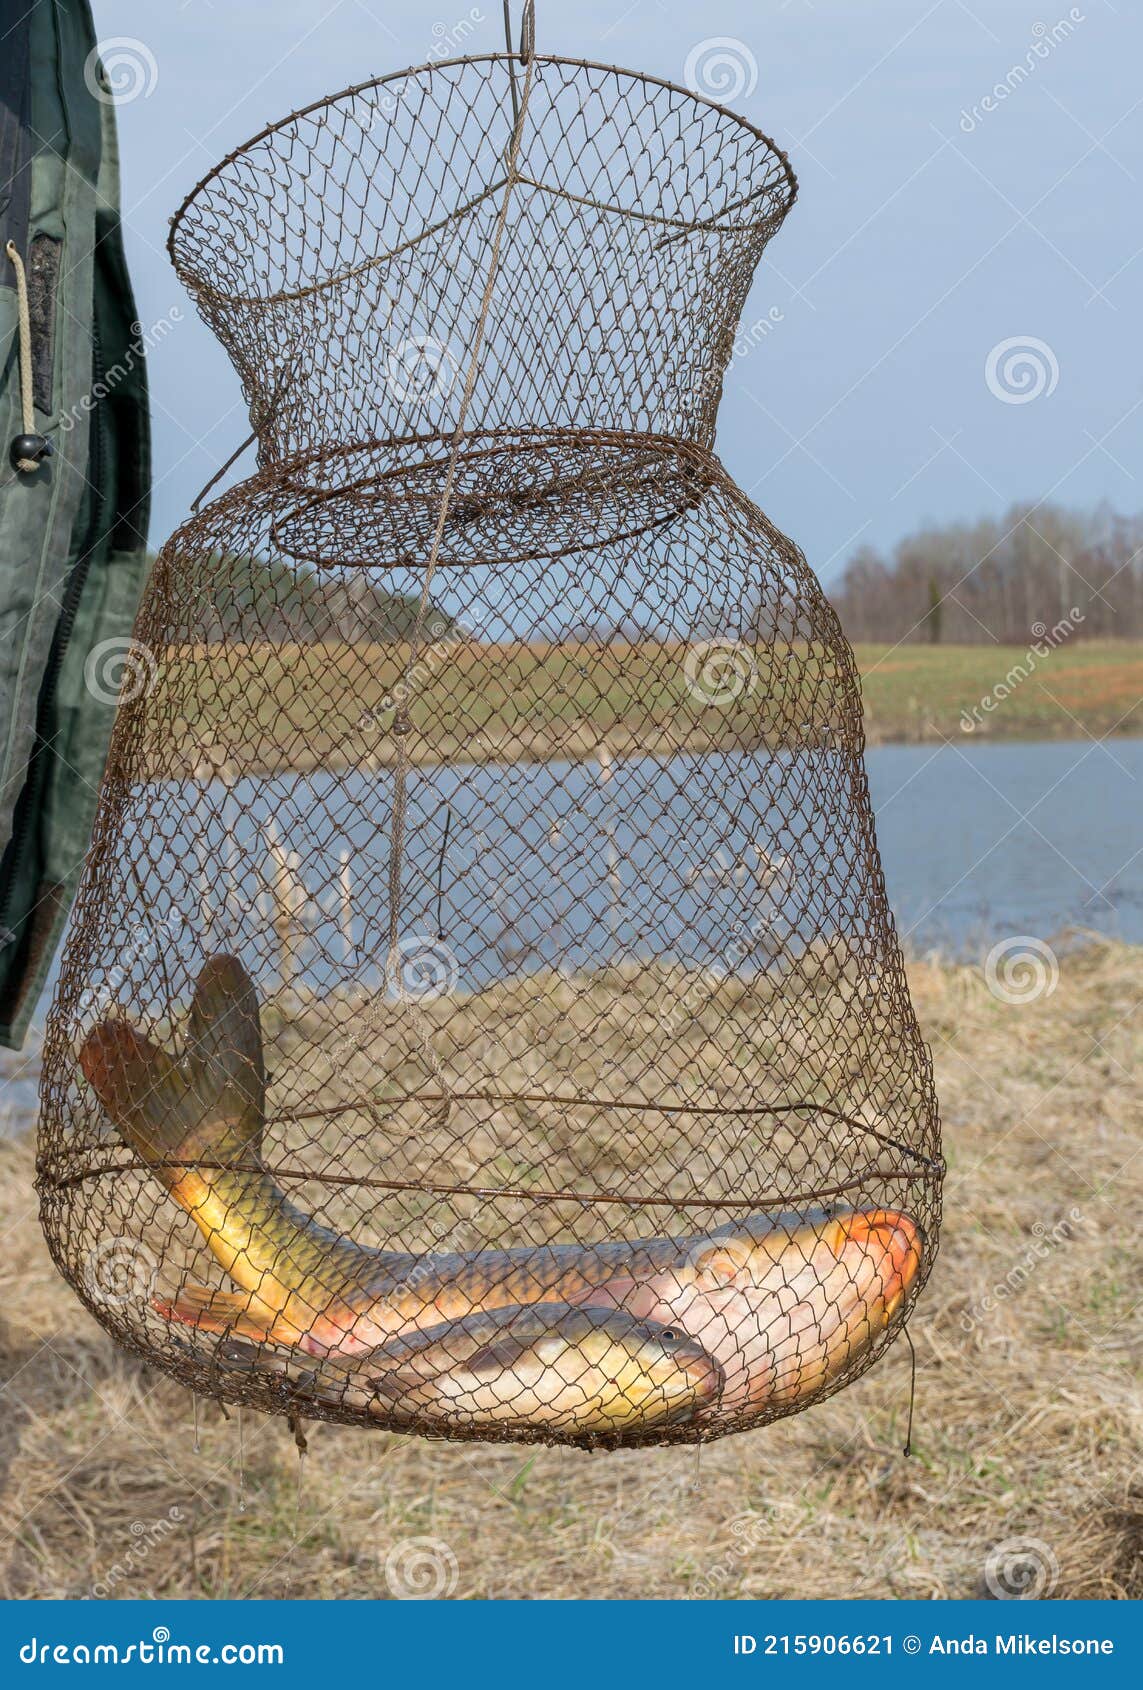 A Carp Caught in a Fish Net, Fishing As a Hobby, Early Spring in